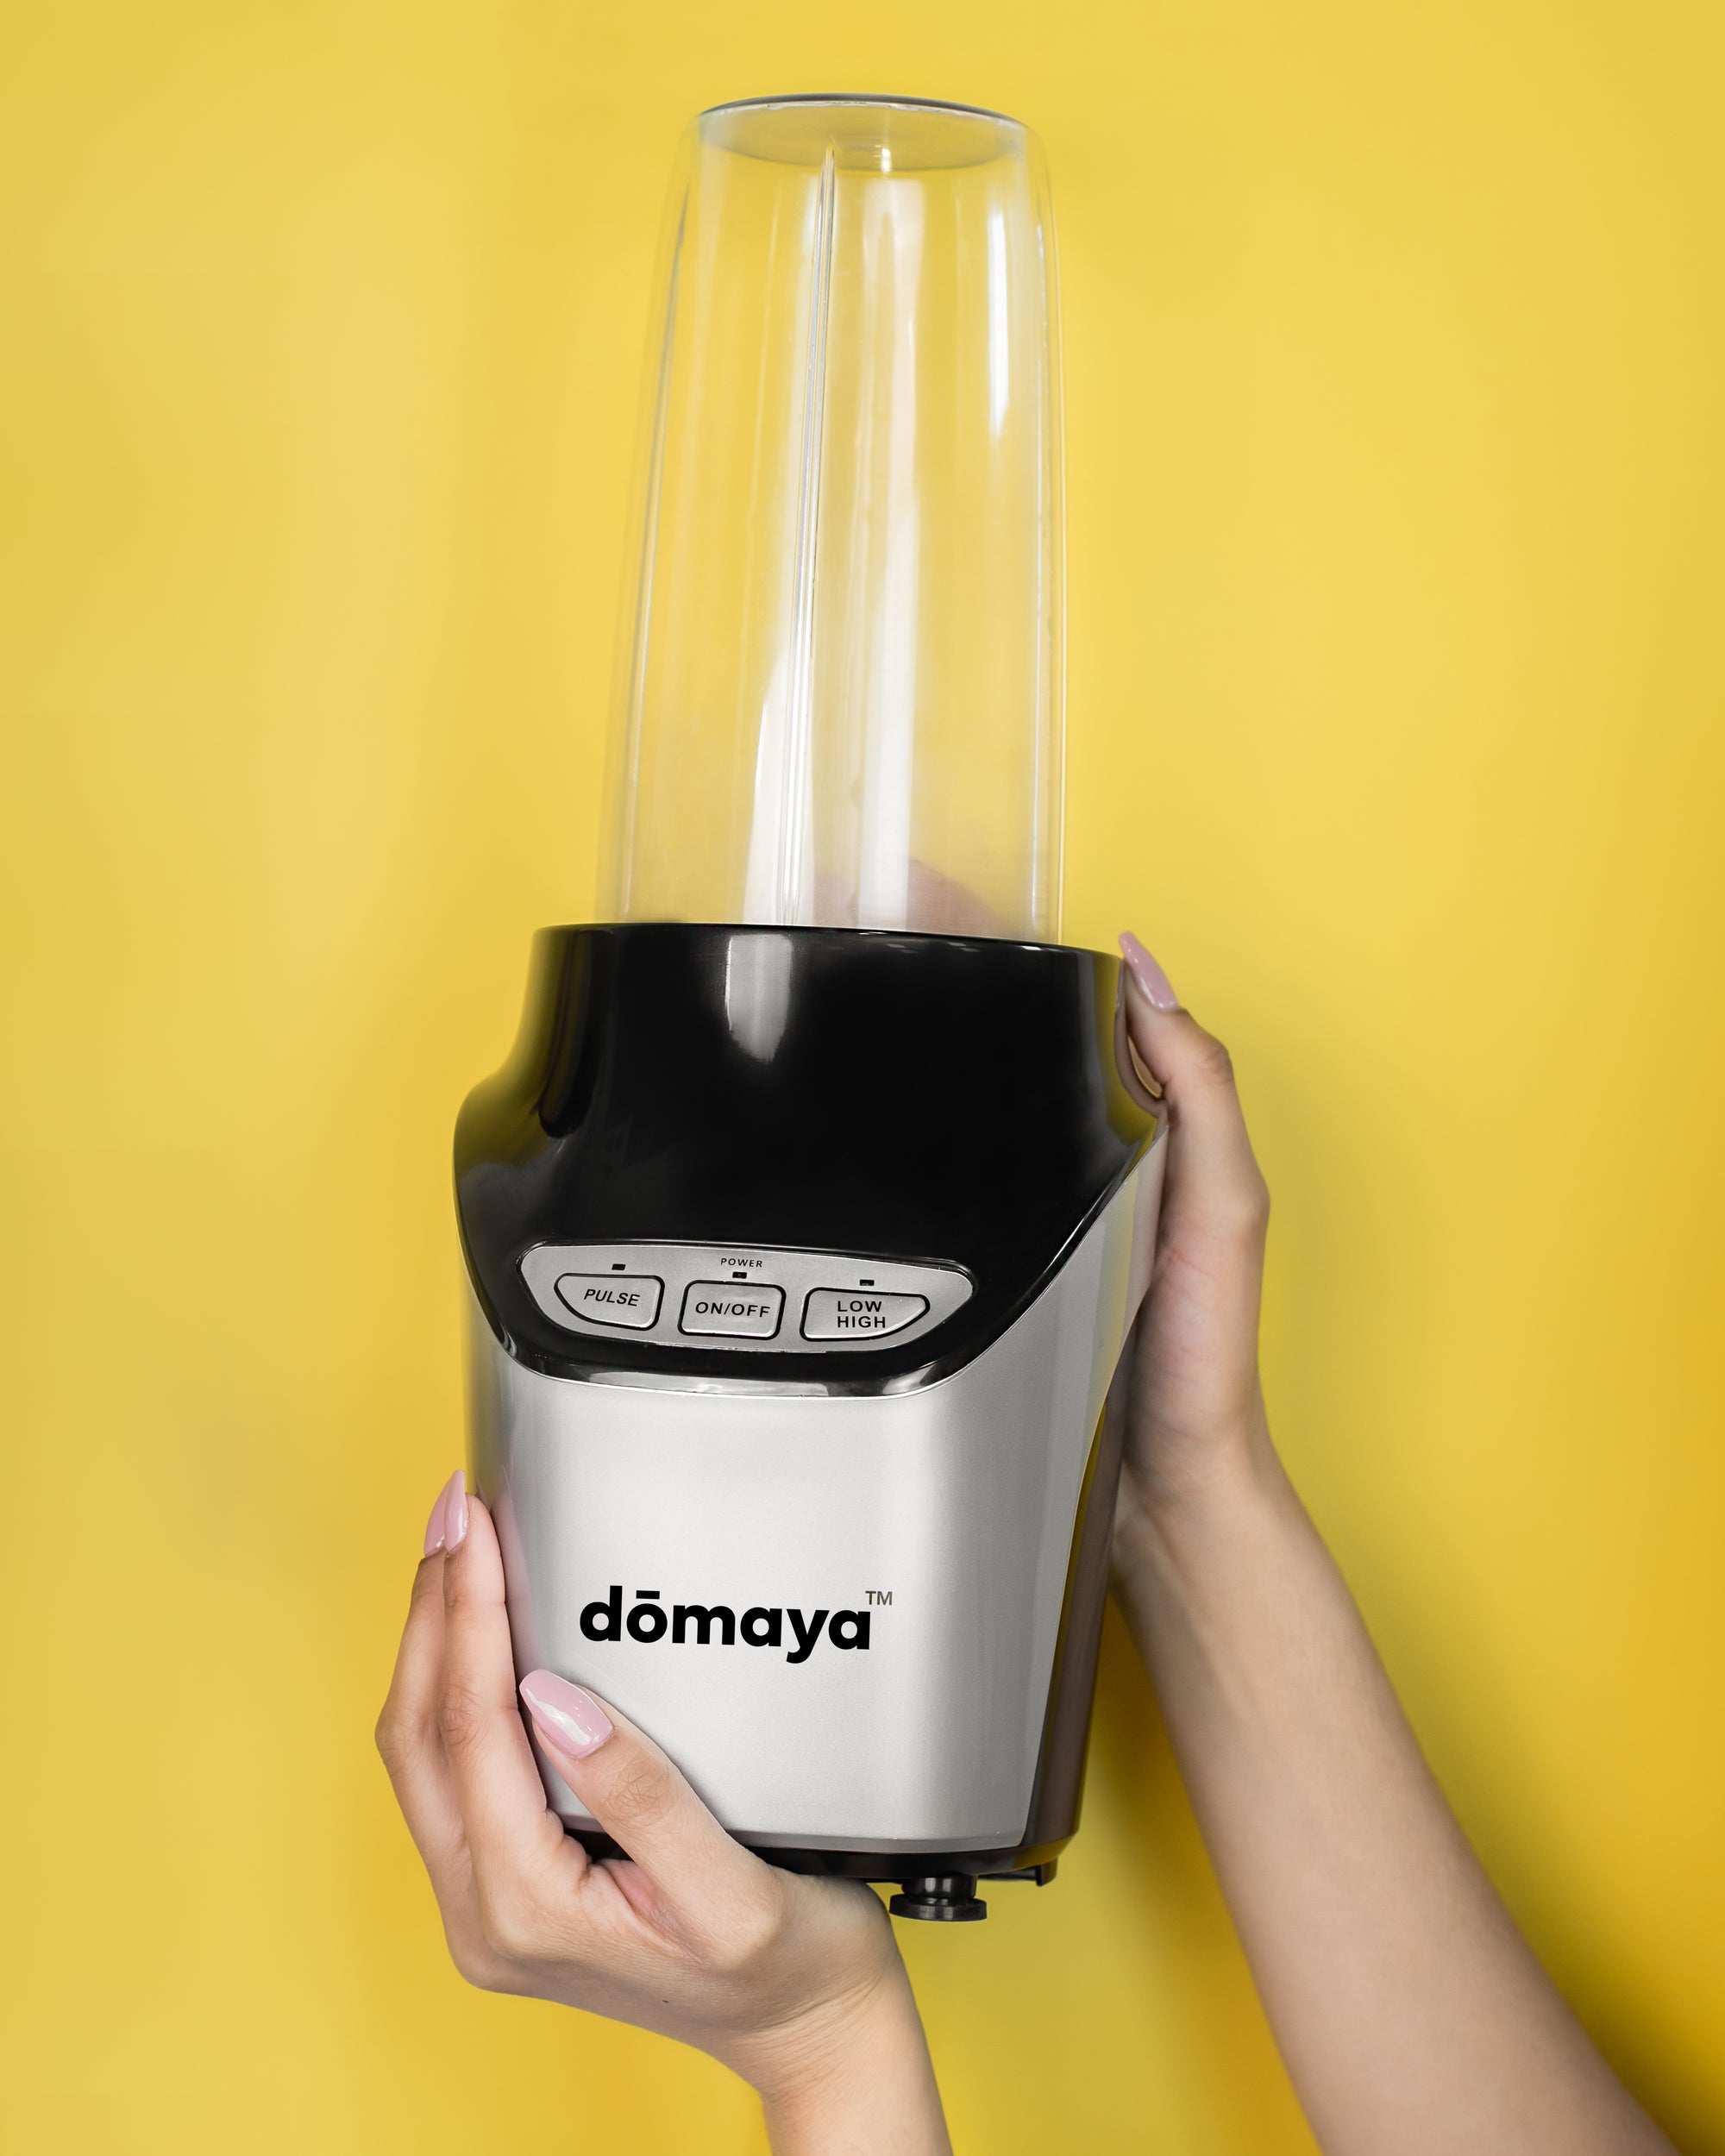 Domaya 1000W High Power Personal Nutri Blender, Multi-functional Portable Bullet Blenders for Kitchen, Use As Coffee Grinder, Baby Food